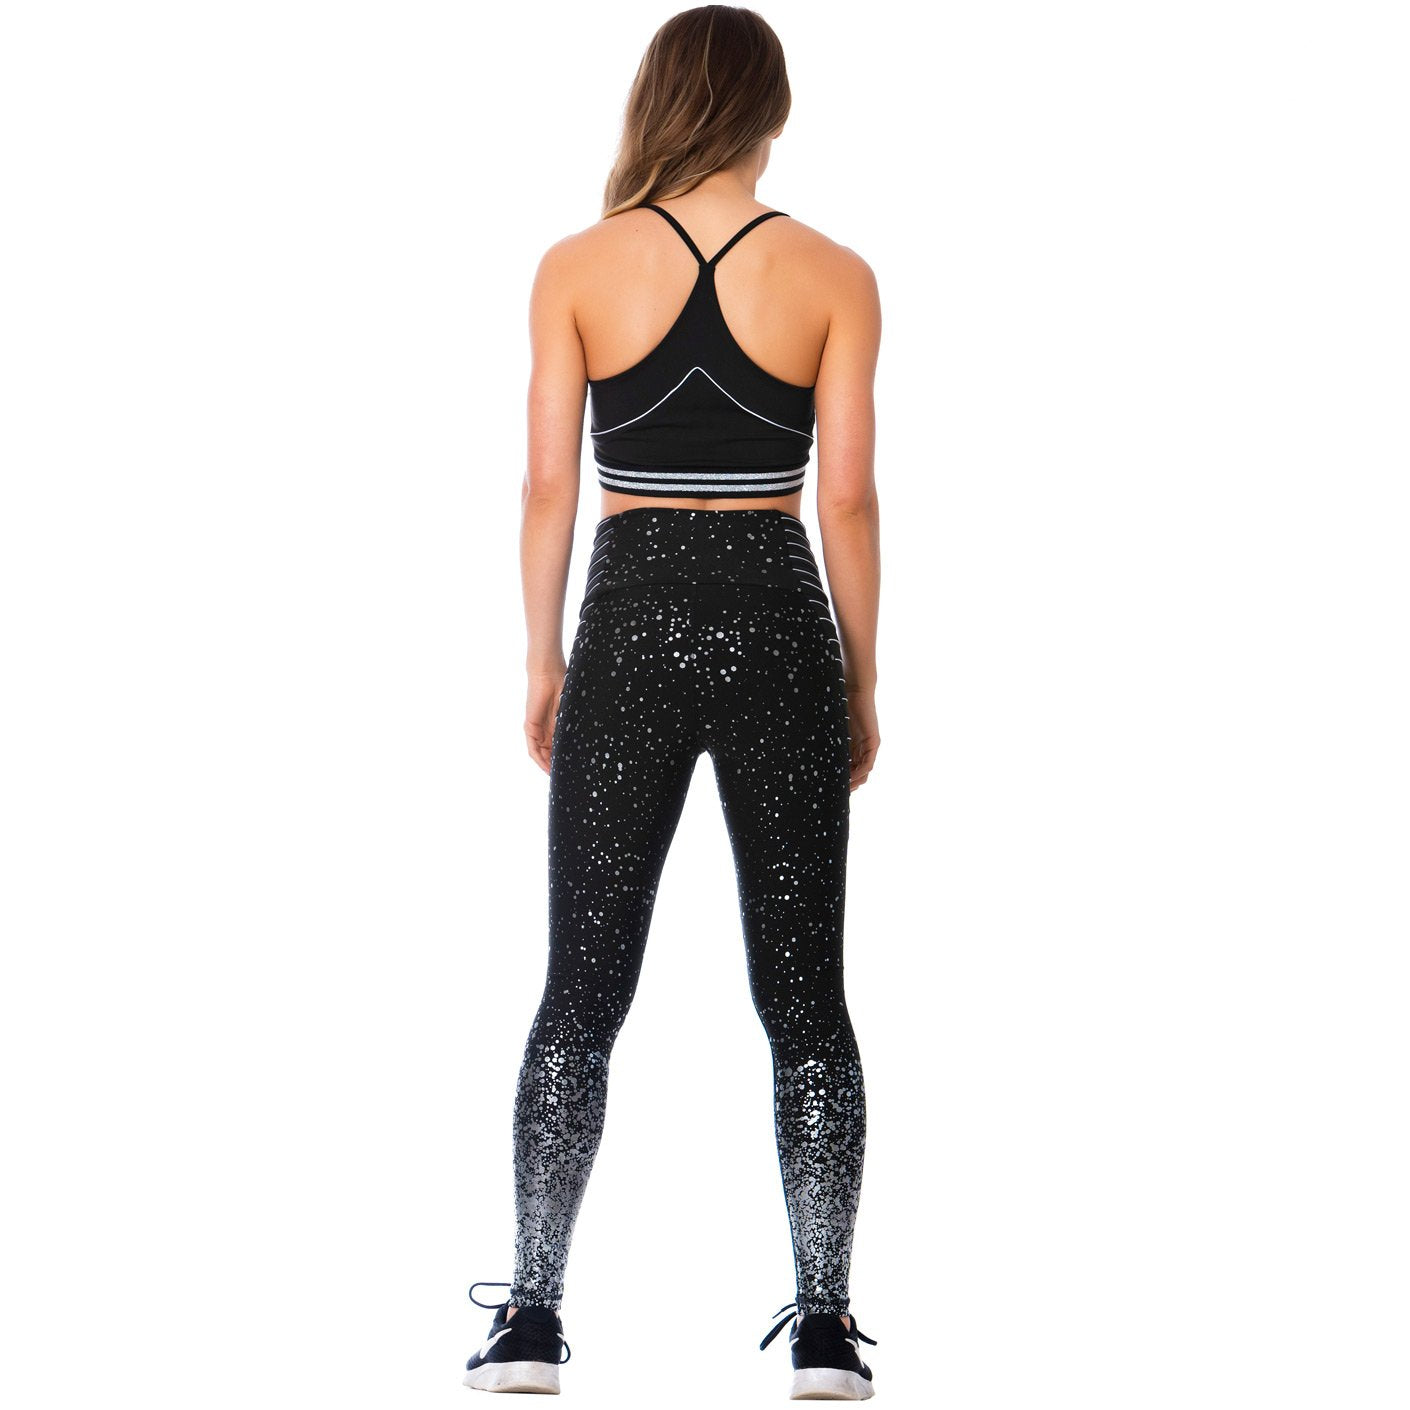 Flexmee 946166 | High-Waisted Shimmer Gym Leggings for Women | High-Waisted Shimmer Sports Leggings for Women’s Tummy Control - fajacolombian